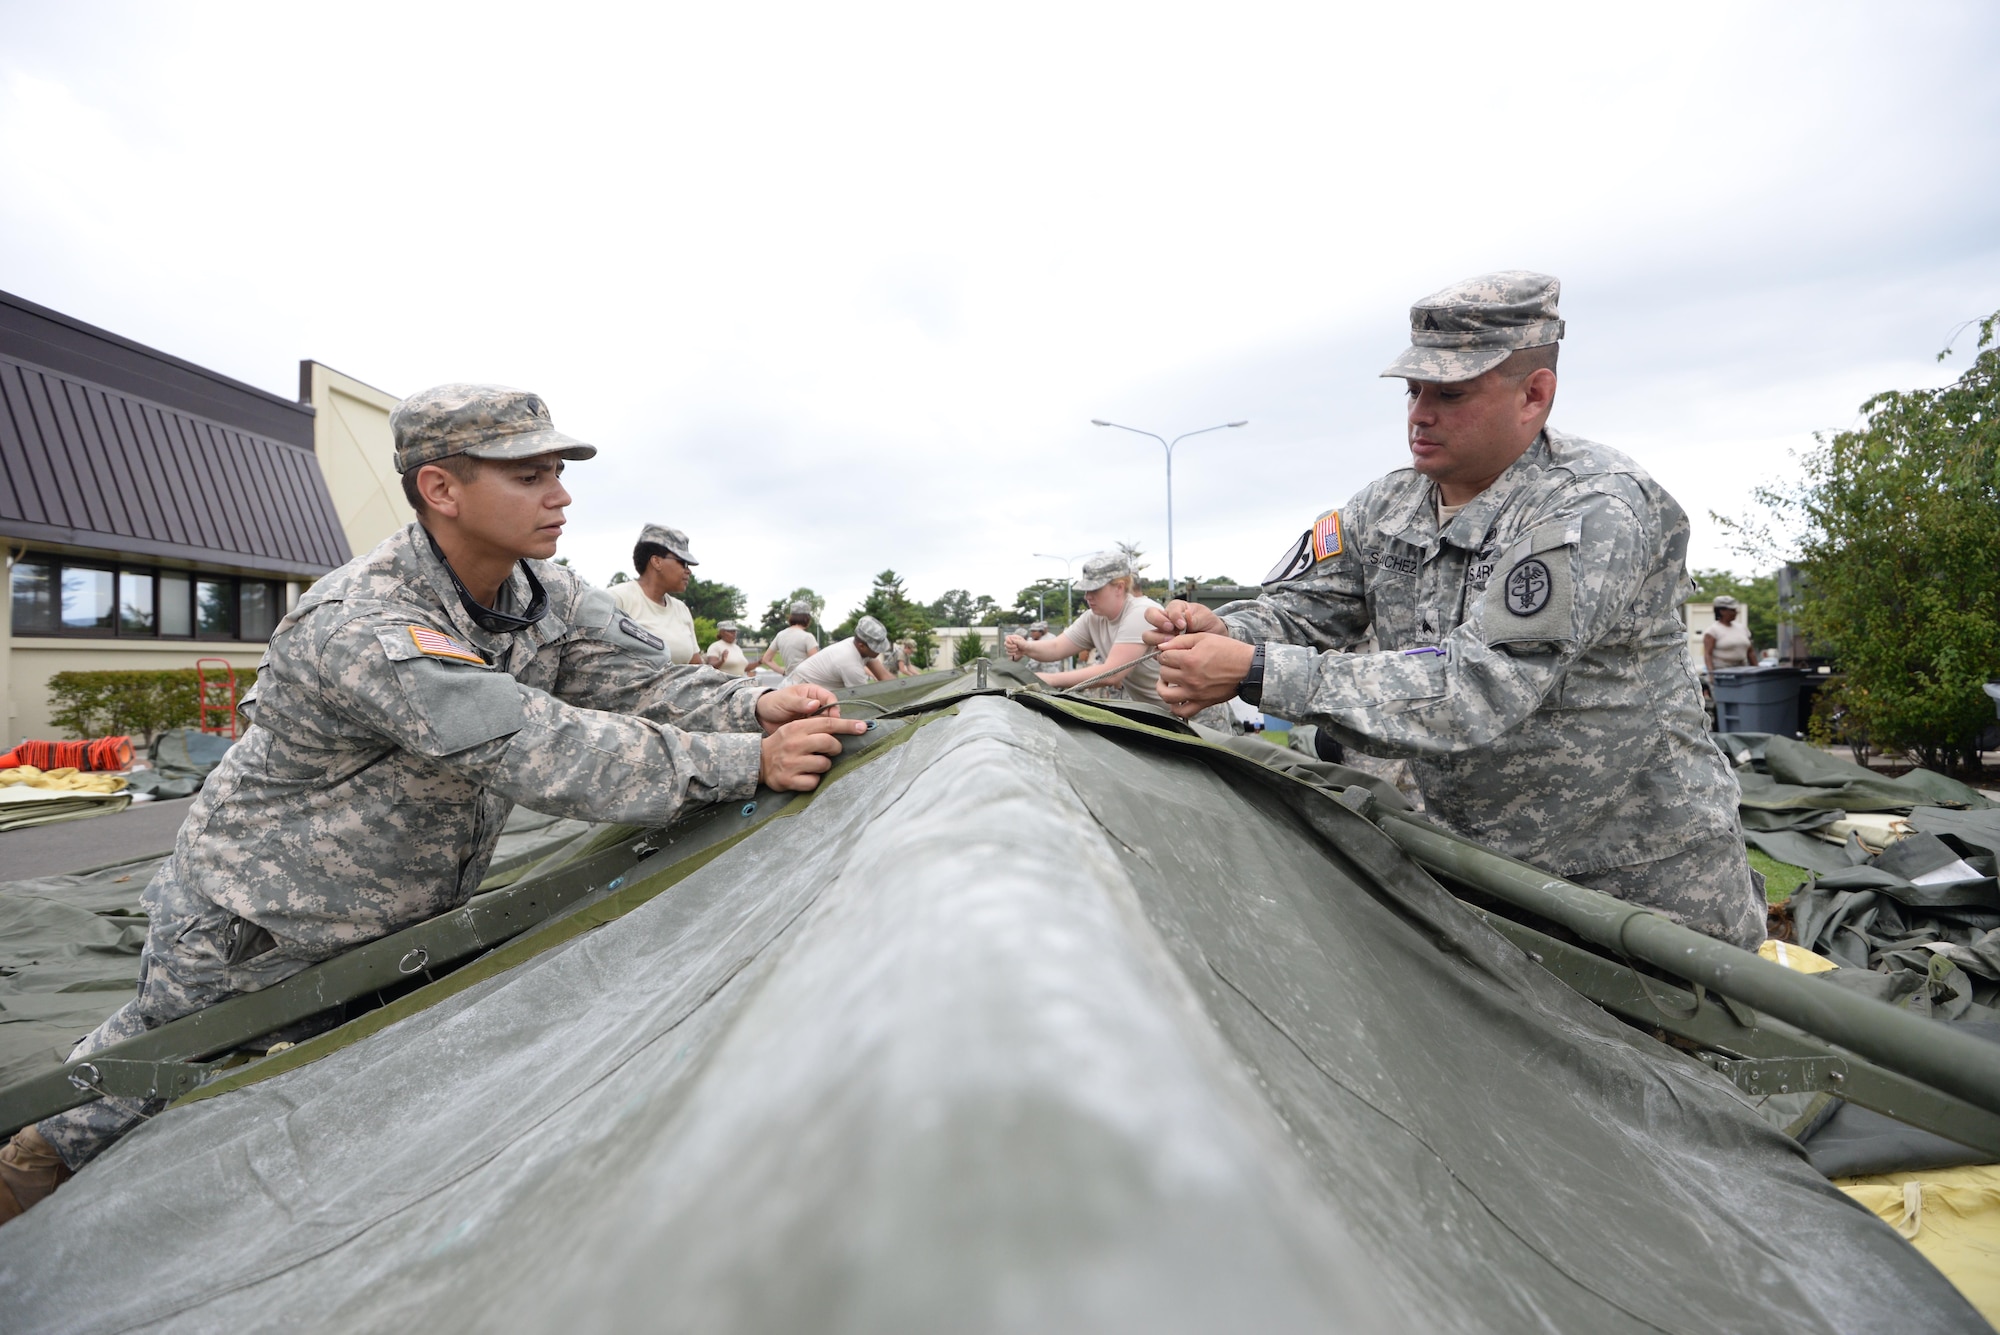 U.S. Army Spc. Dwight Chavez (left), 228th Combat Support Hospital preventive medicine specialist, and Sgt. Randy Sanchez (right), 228th CSH healthcare sergeant, construct a tent in support of a medical exercise being held at Misawa Air Base, Japan, Aug. 18, 2016. The 228th CSH will be conducting joint exercises over the course of a week with the 35th Medical Group from Misawa AB. (U.S. Air Force photo by Senior Airman Jarrod Vickers) 